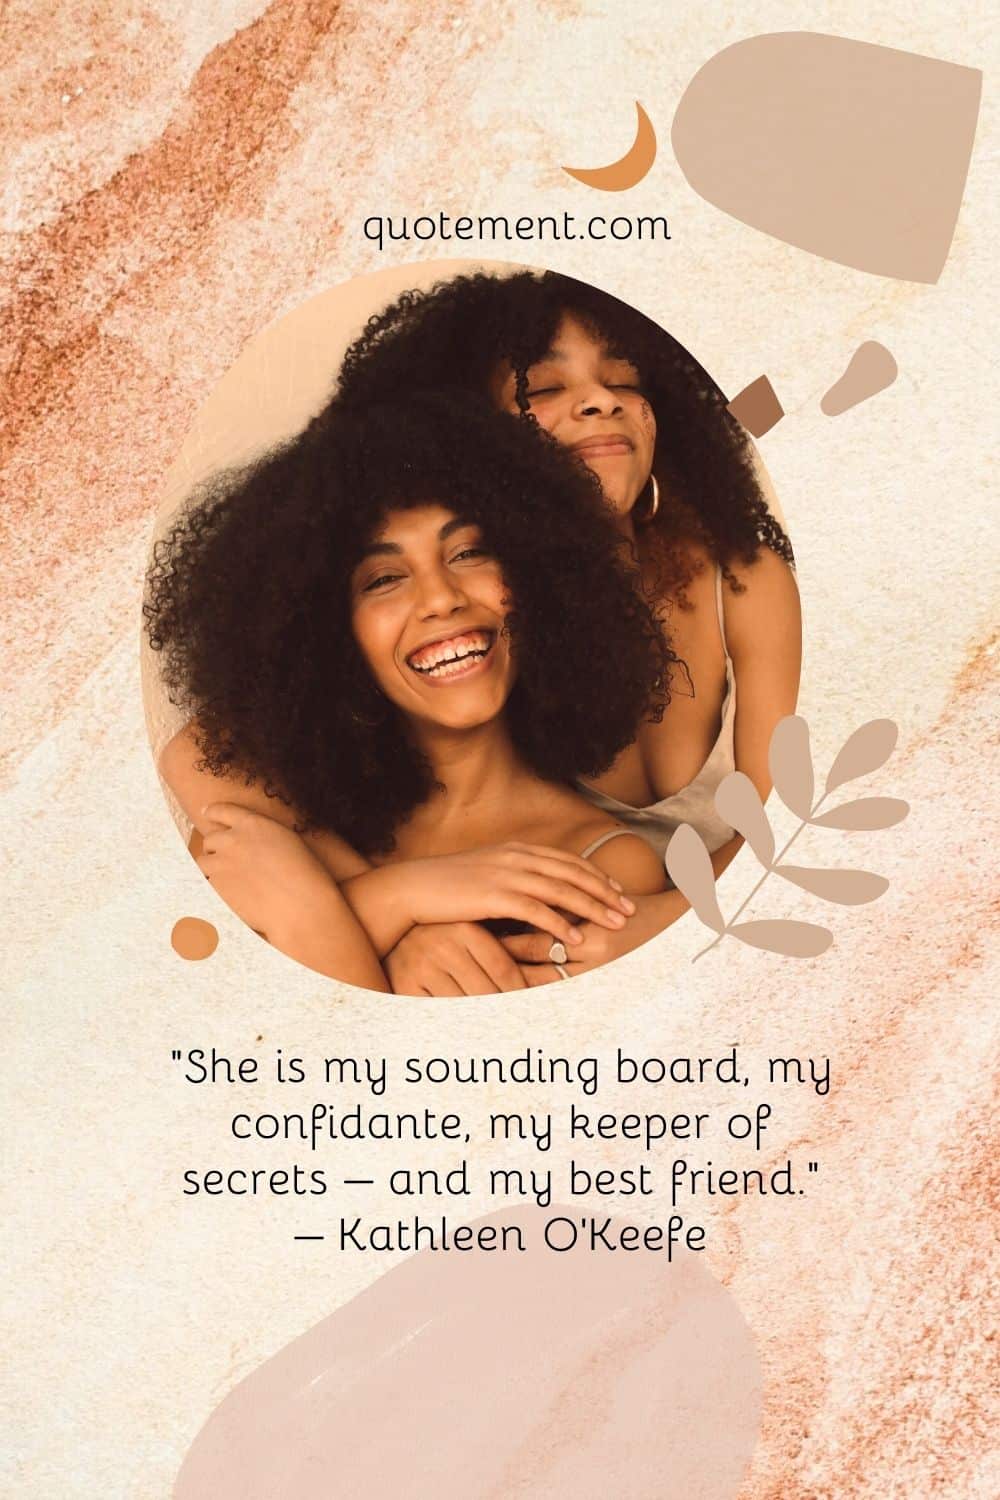 “She is my sounding board, my confidante, my keeper of secrets – and my best friend.” – Kathleen O’Keefe